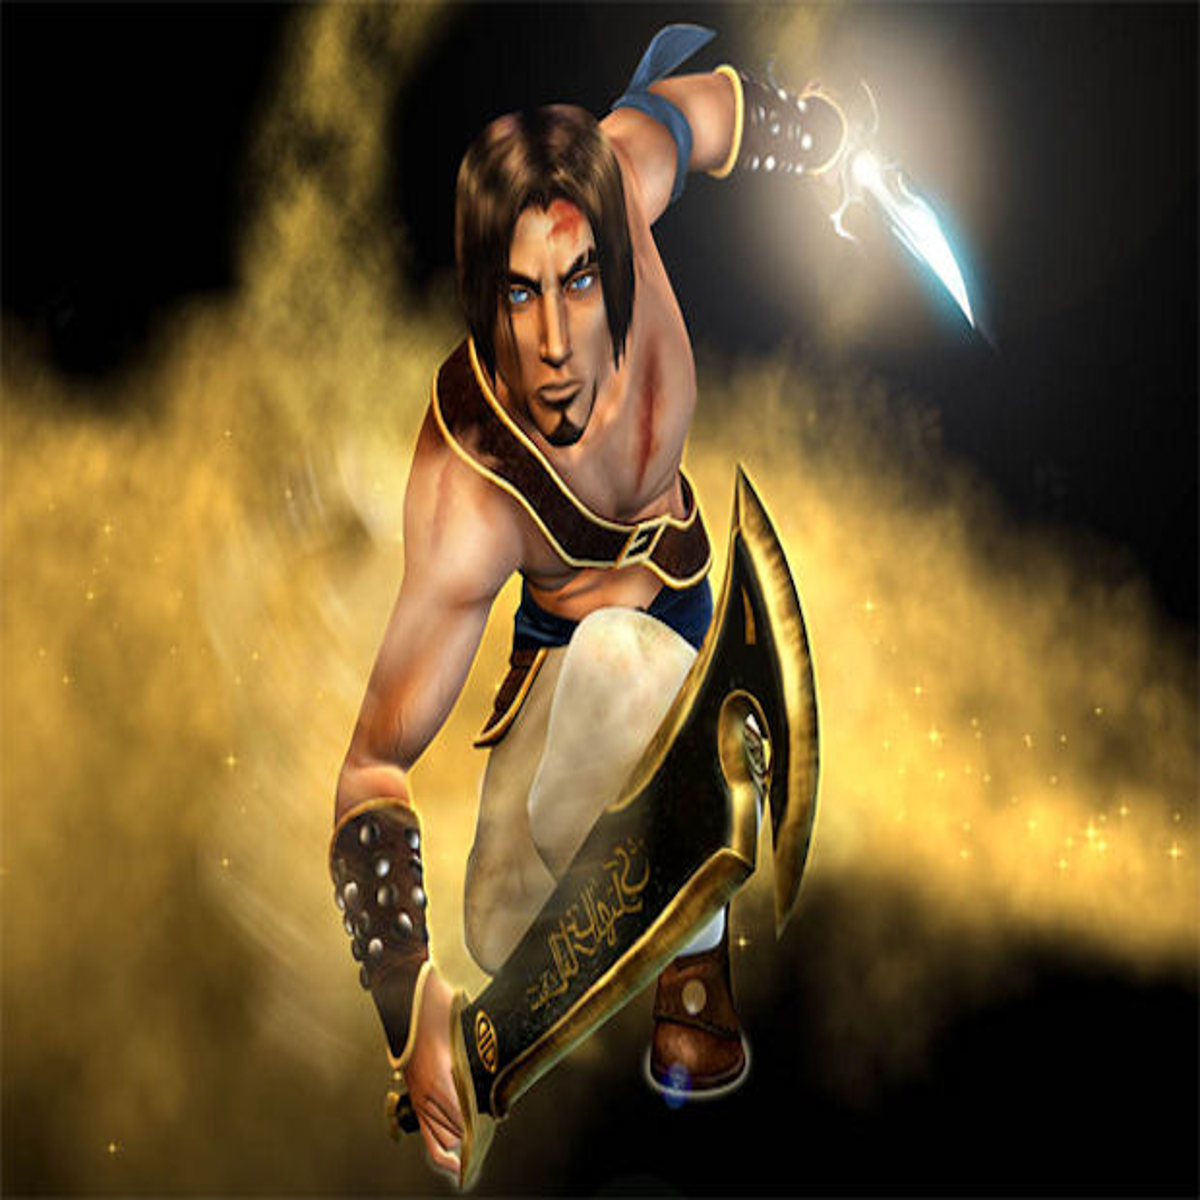 Prince of Persia: The Two Thrones Review - GameSpot